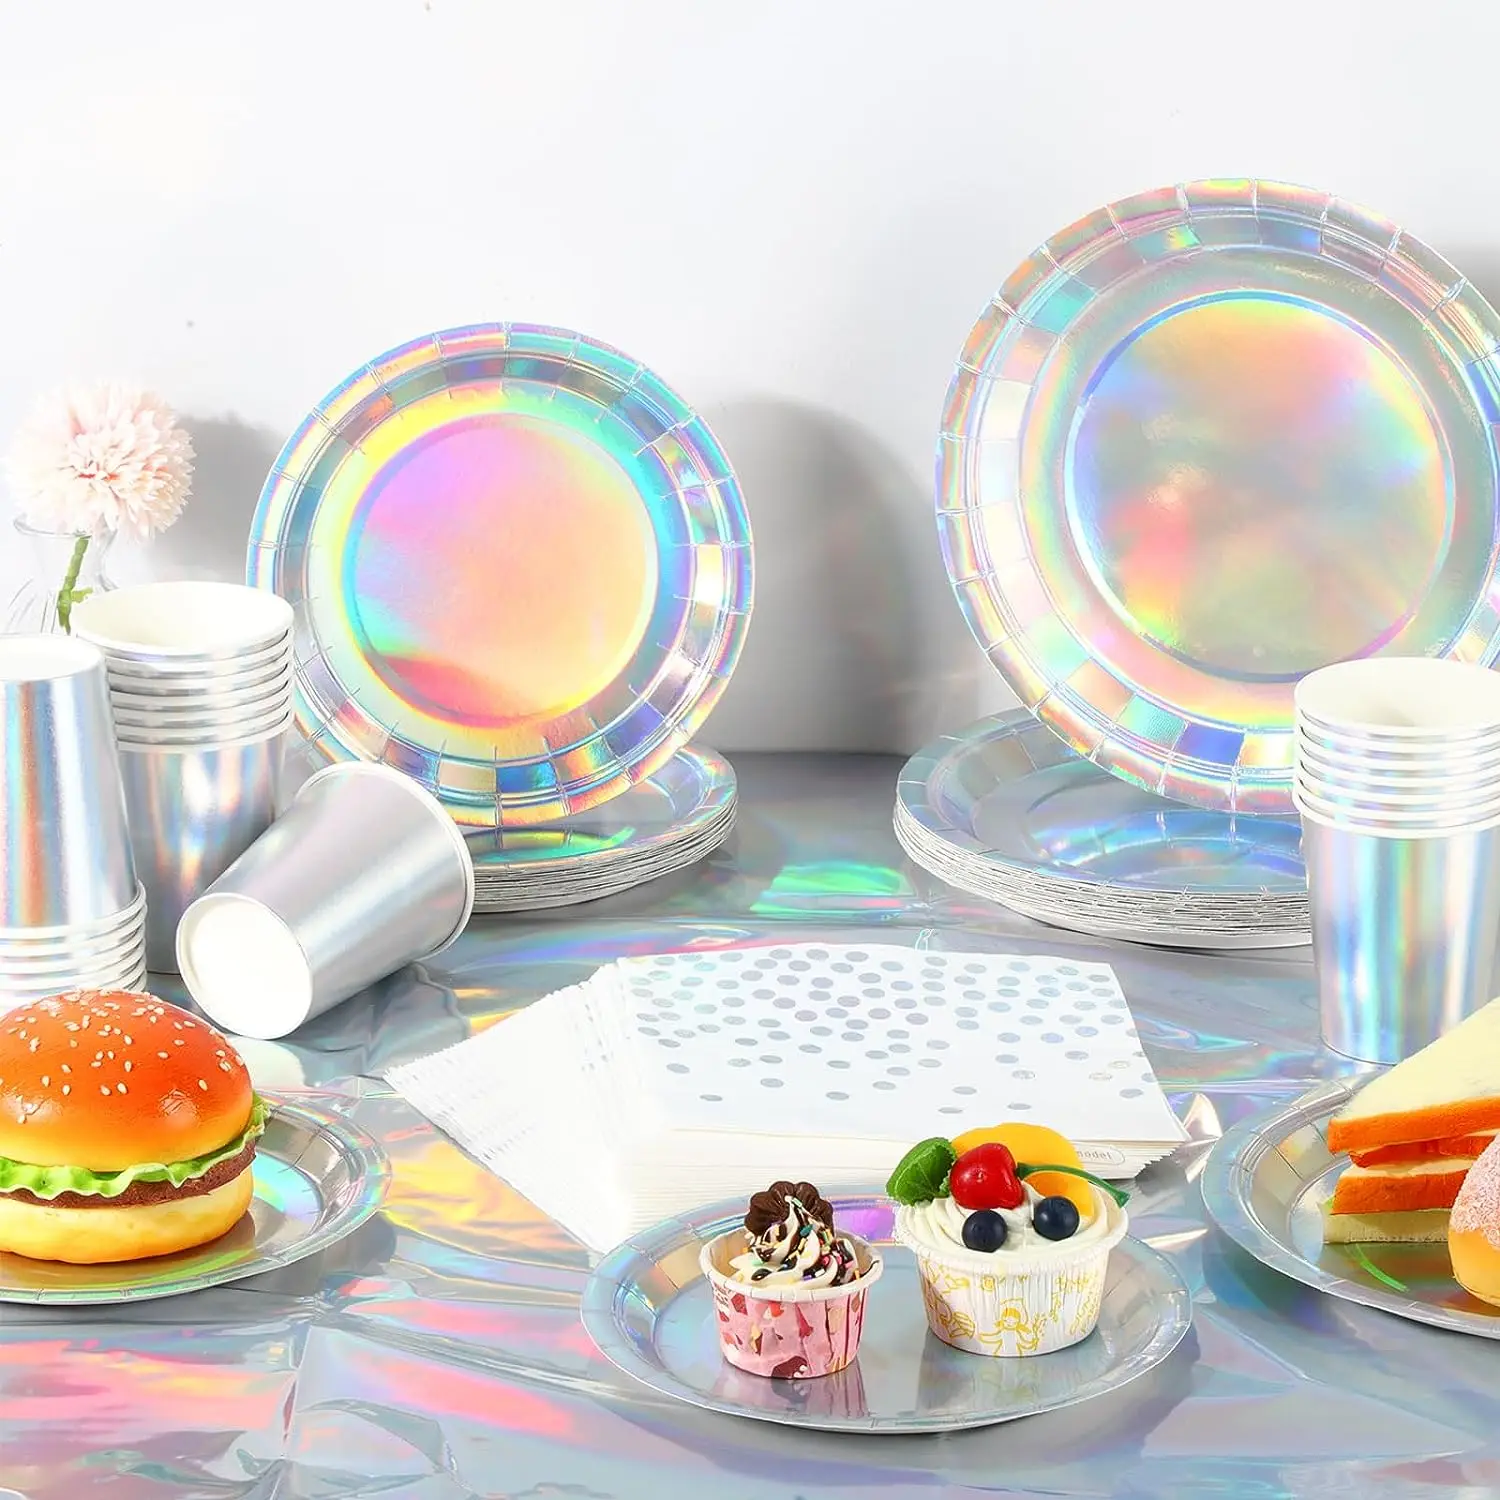 https://ae01.alicdn.com/kf/S1036011caacb4ab08cfa640d1f76fe9dJ/Iridescent-Party-Supplies-24Guests-Holographic-Paper-Plates-Napkins-Cups-Birthday-Disposable-Tableware-Wedding-Dinnerware-Sets.jpg